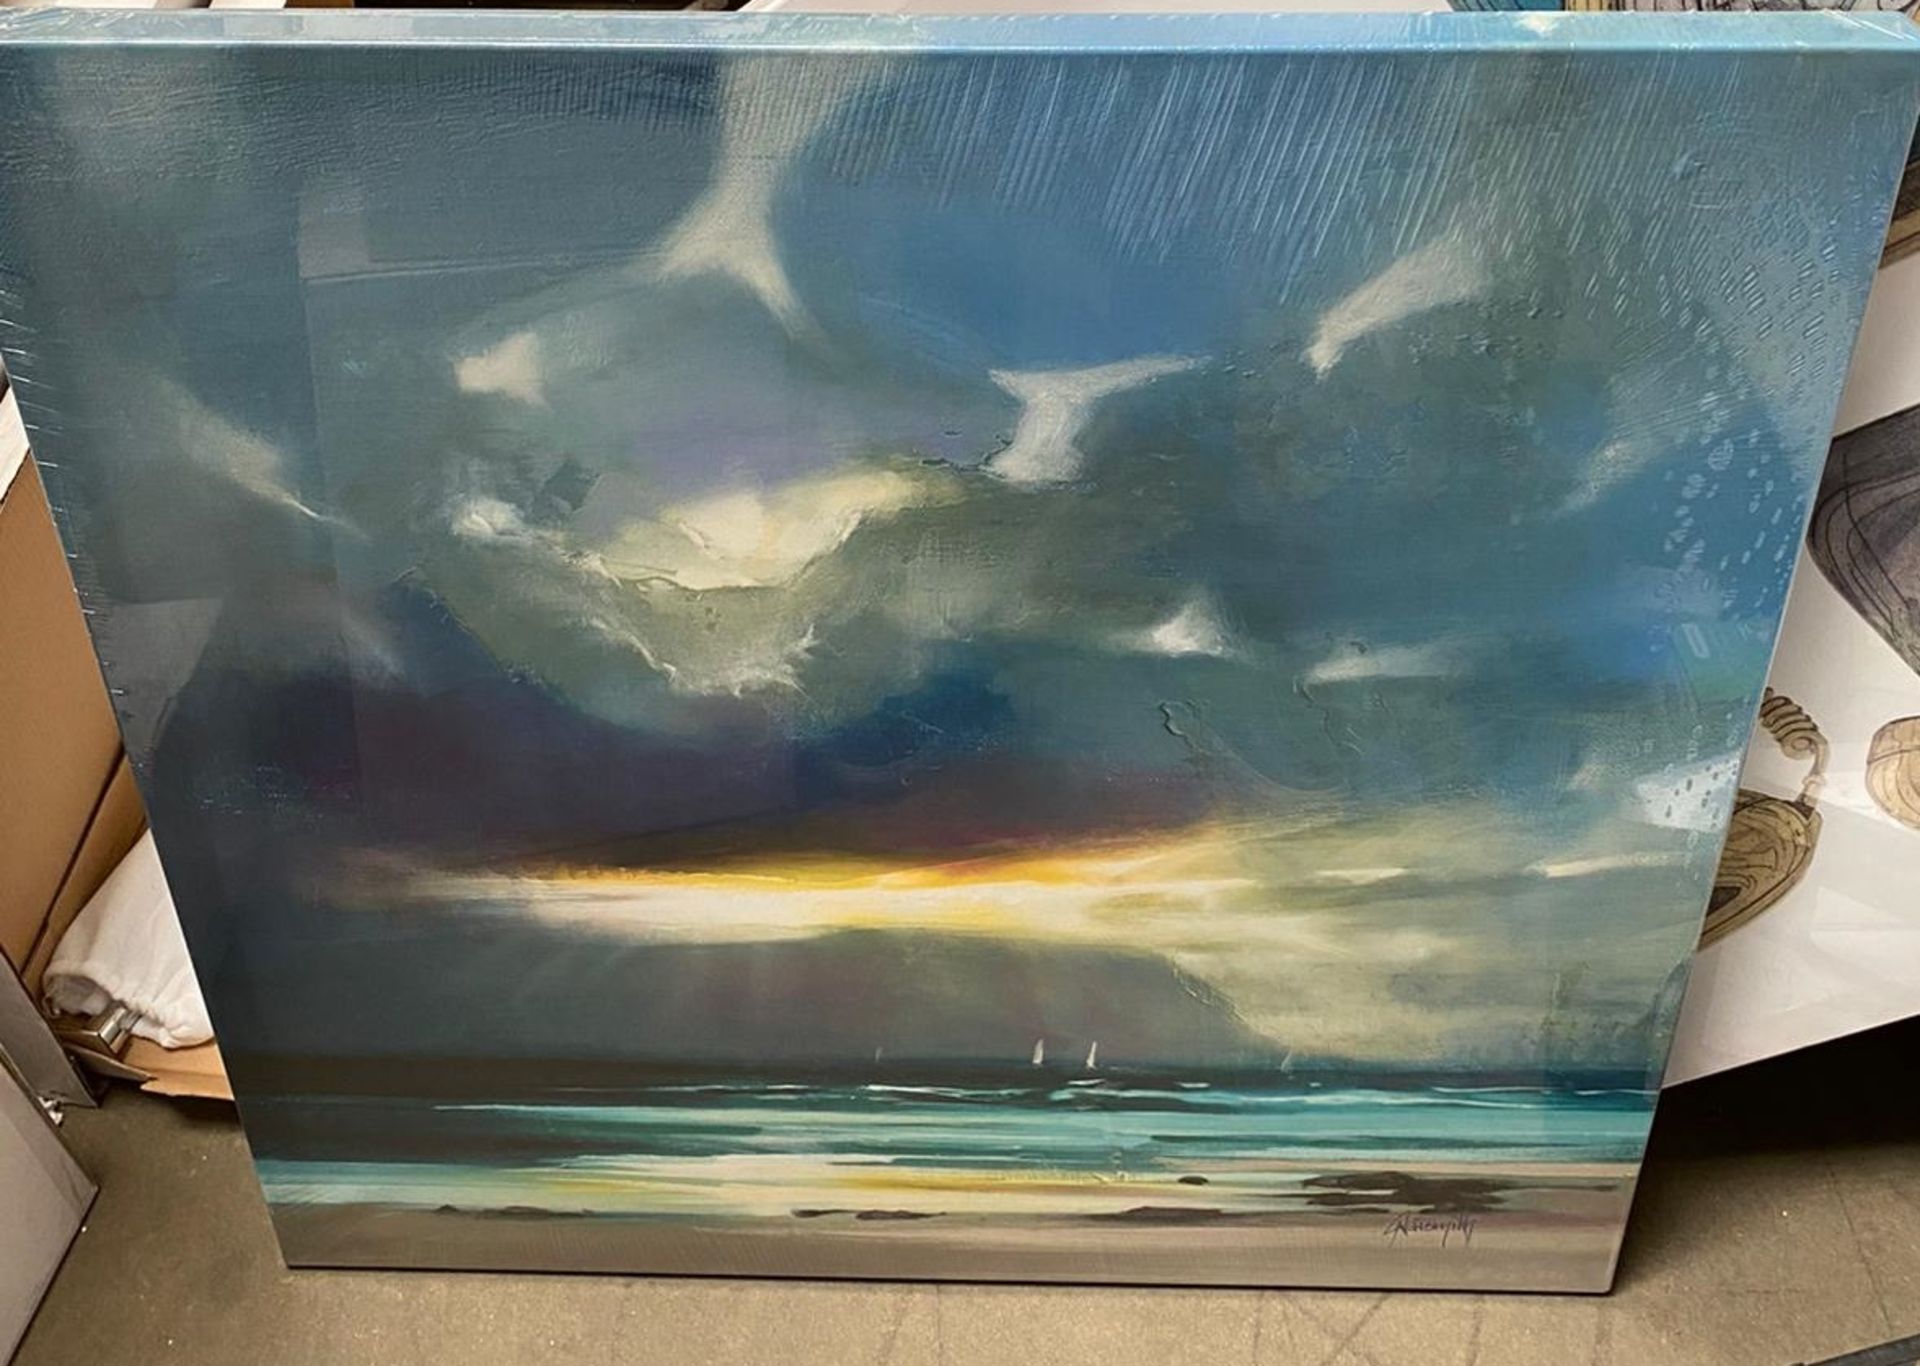 3 x Scott Naismith Assorted Collection of Canvas Prints - New Stock - Location: Altrincham WA14 - Image 5 of 6